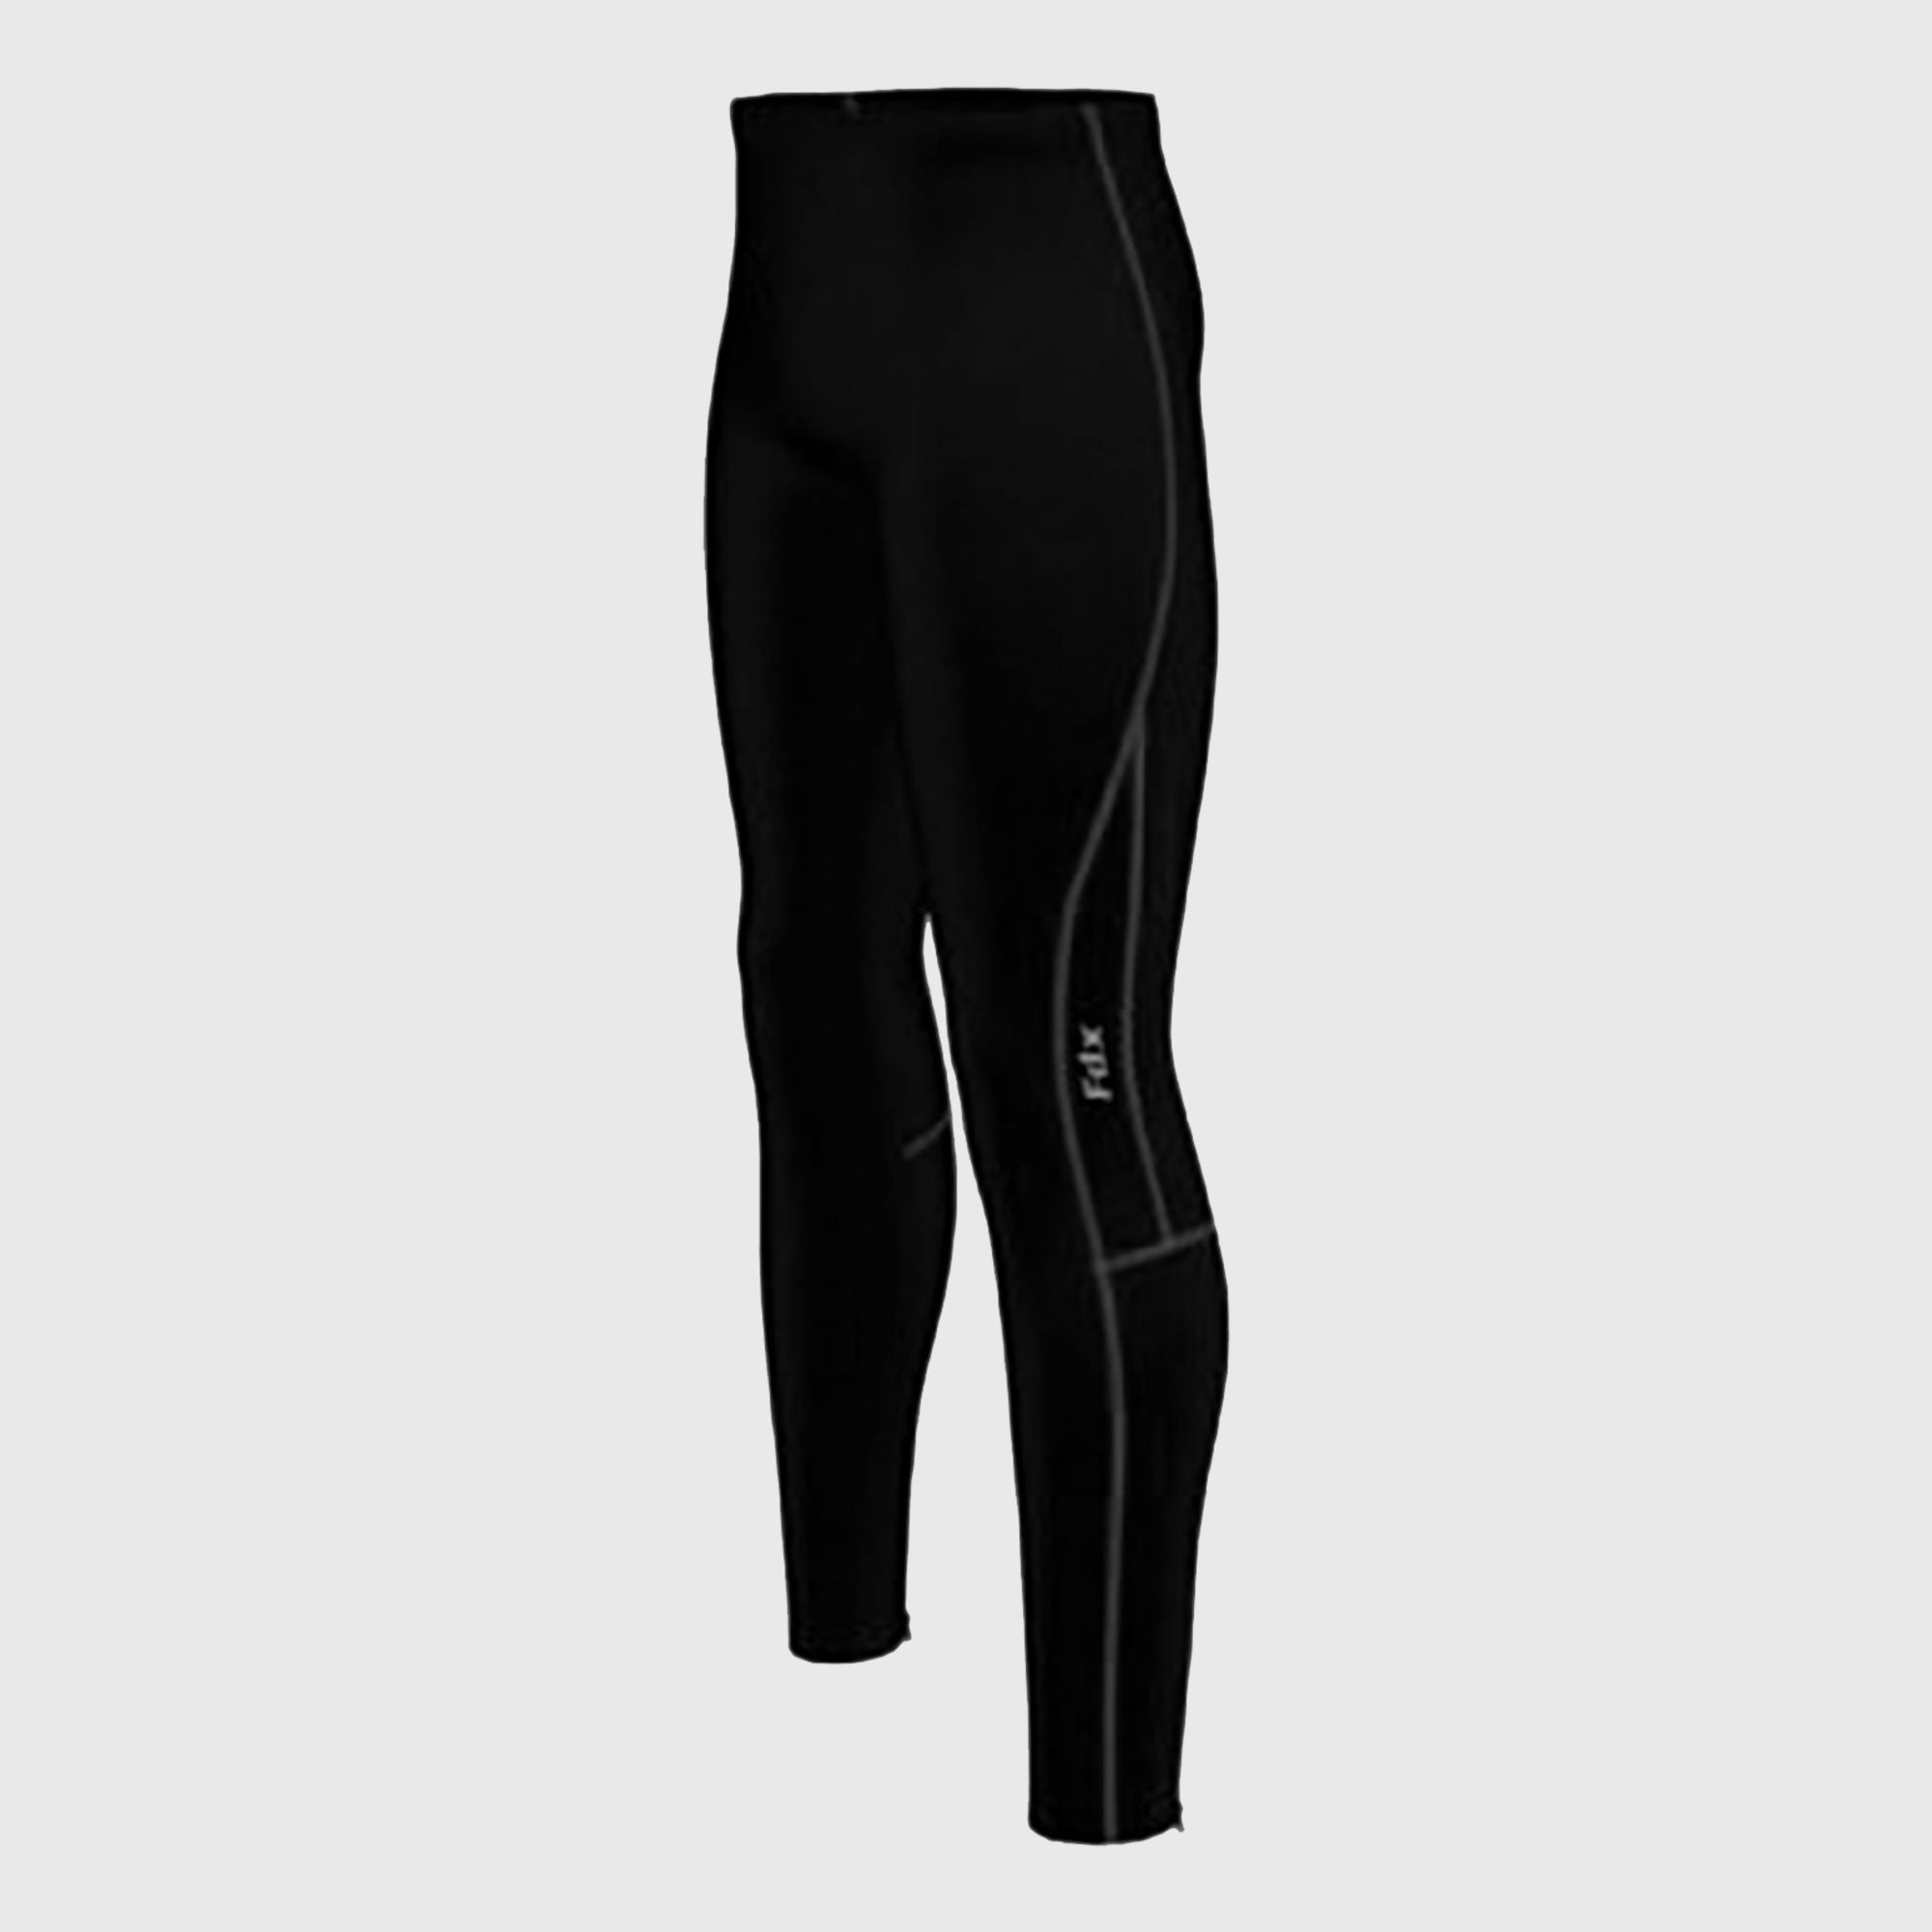 Men's Compression Tight Pants Running Cycling Basketball Soccer